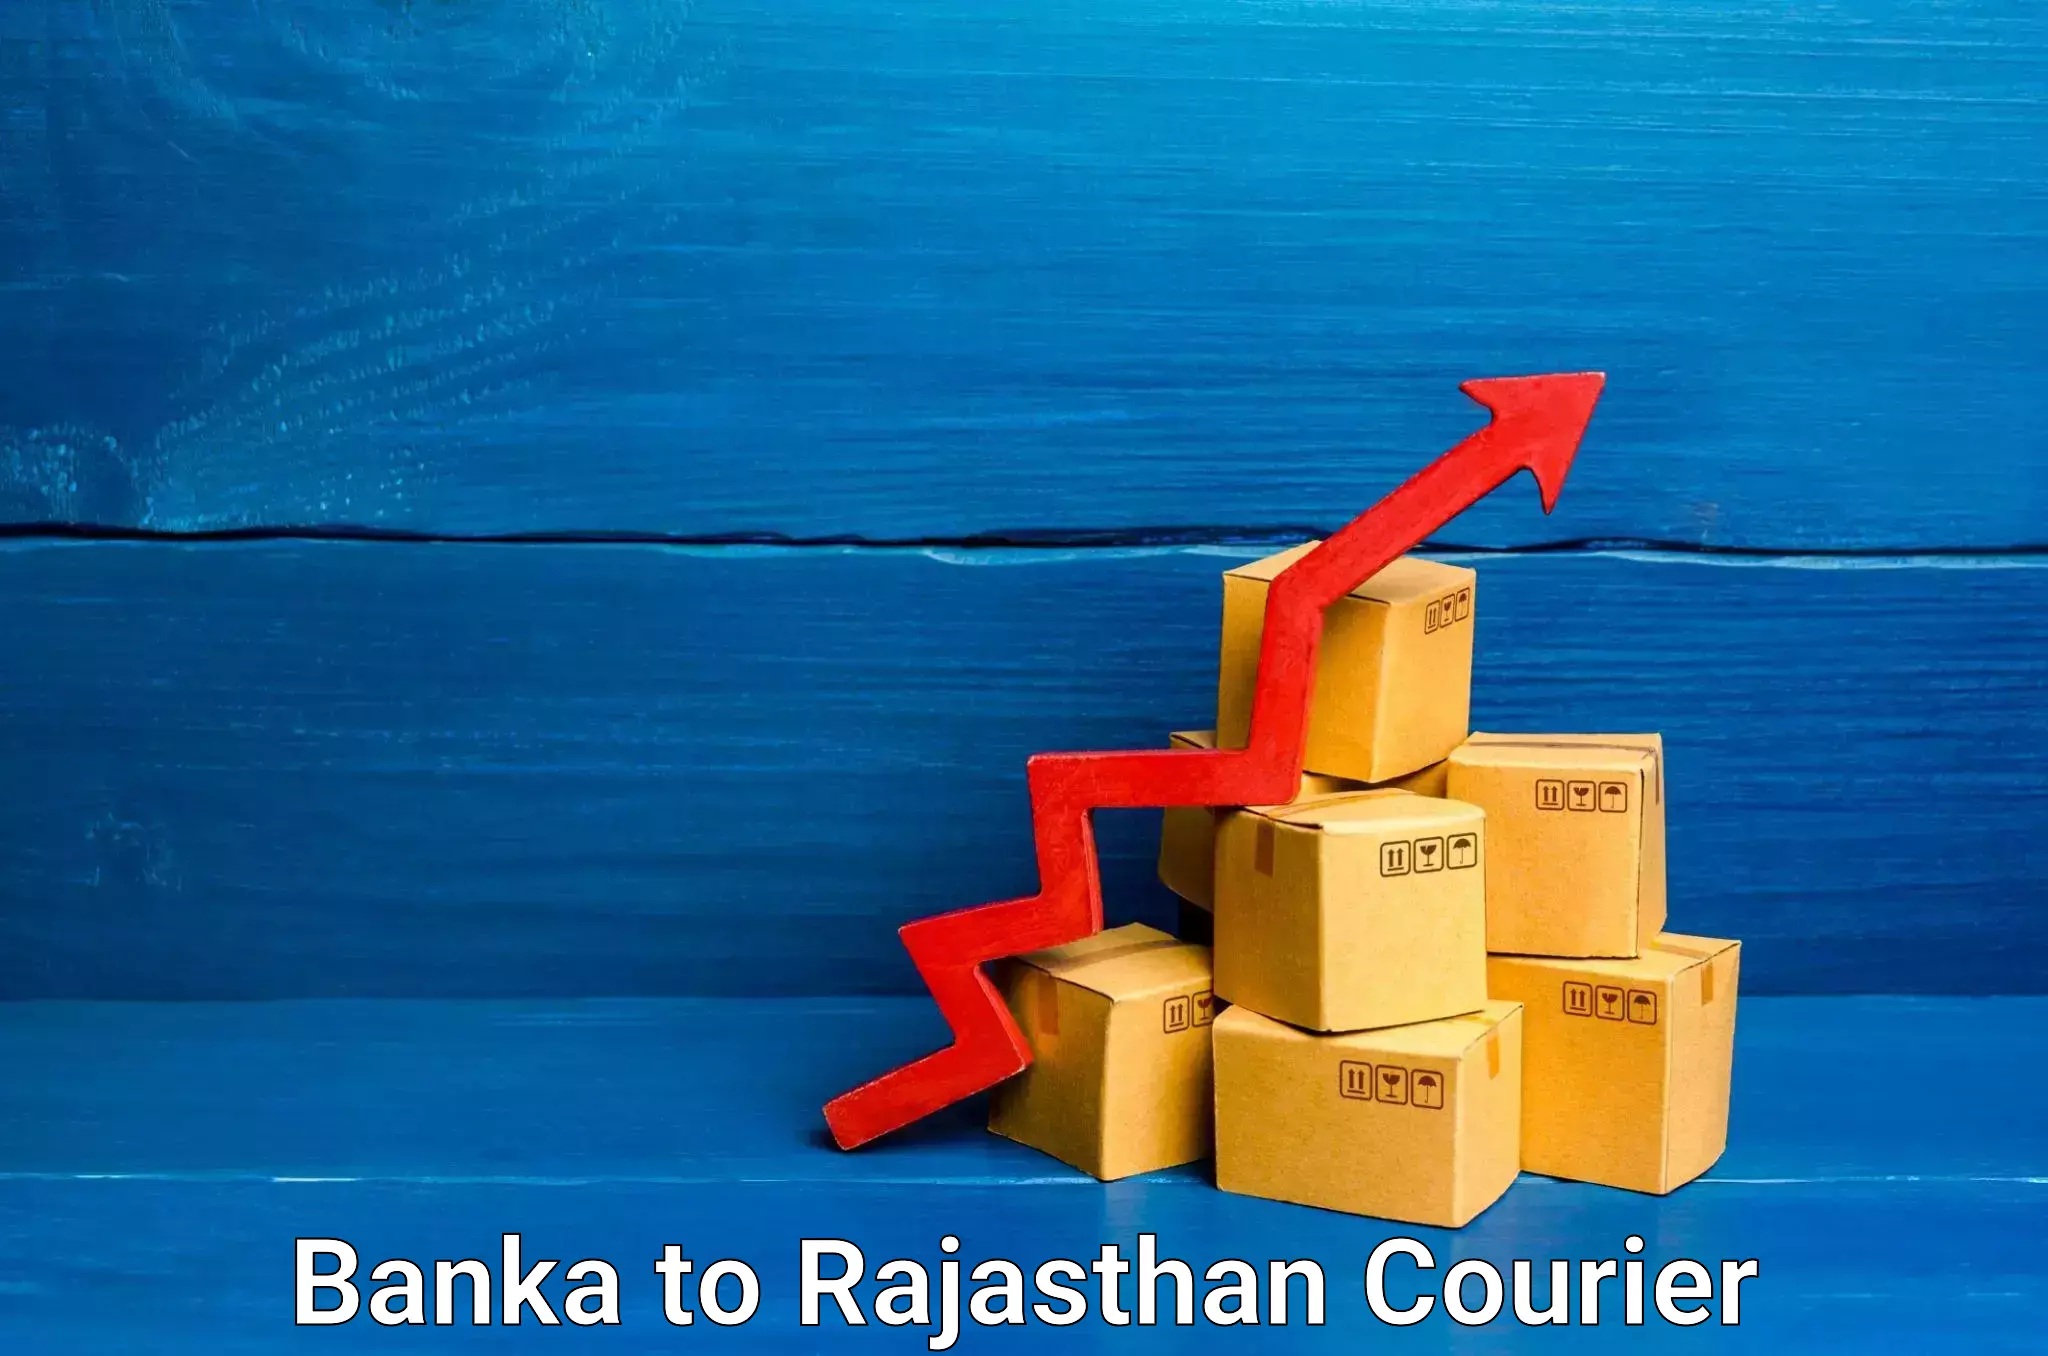 Furniture delivery service Banka to Rajasthan